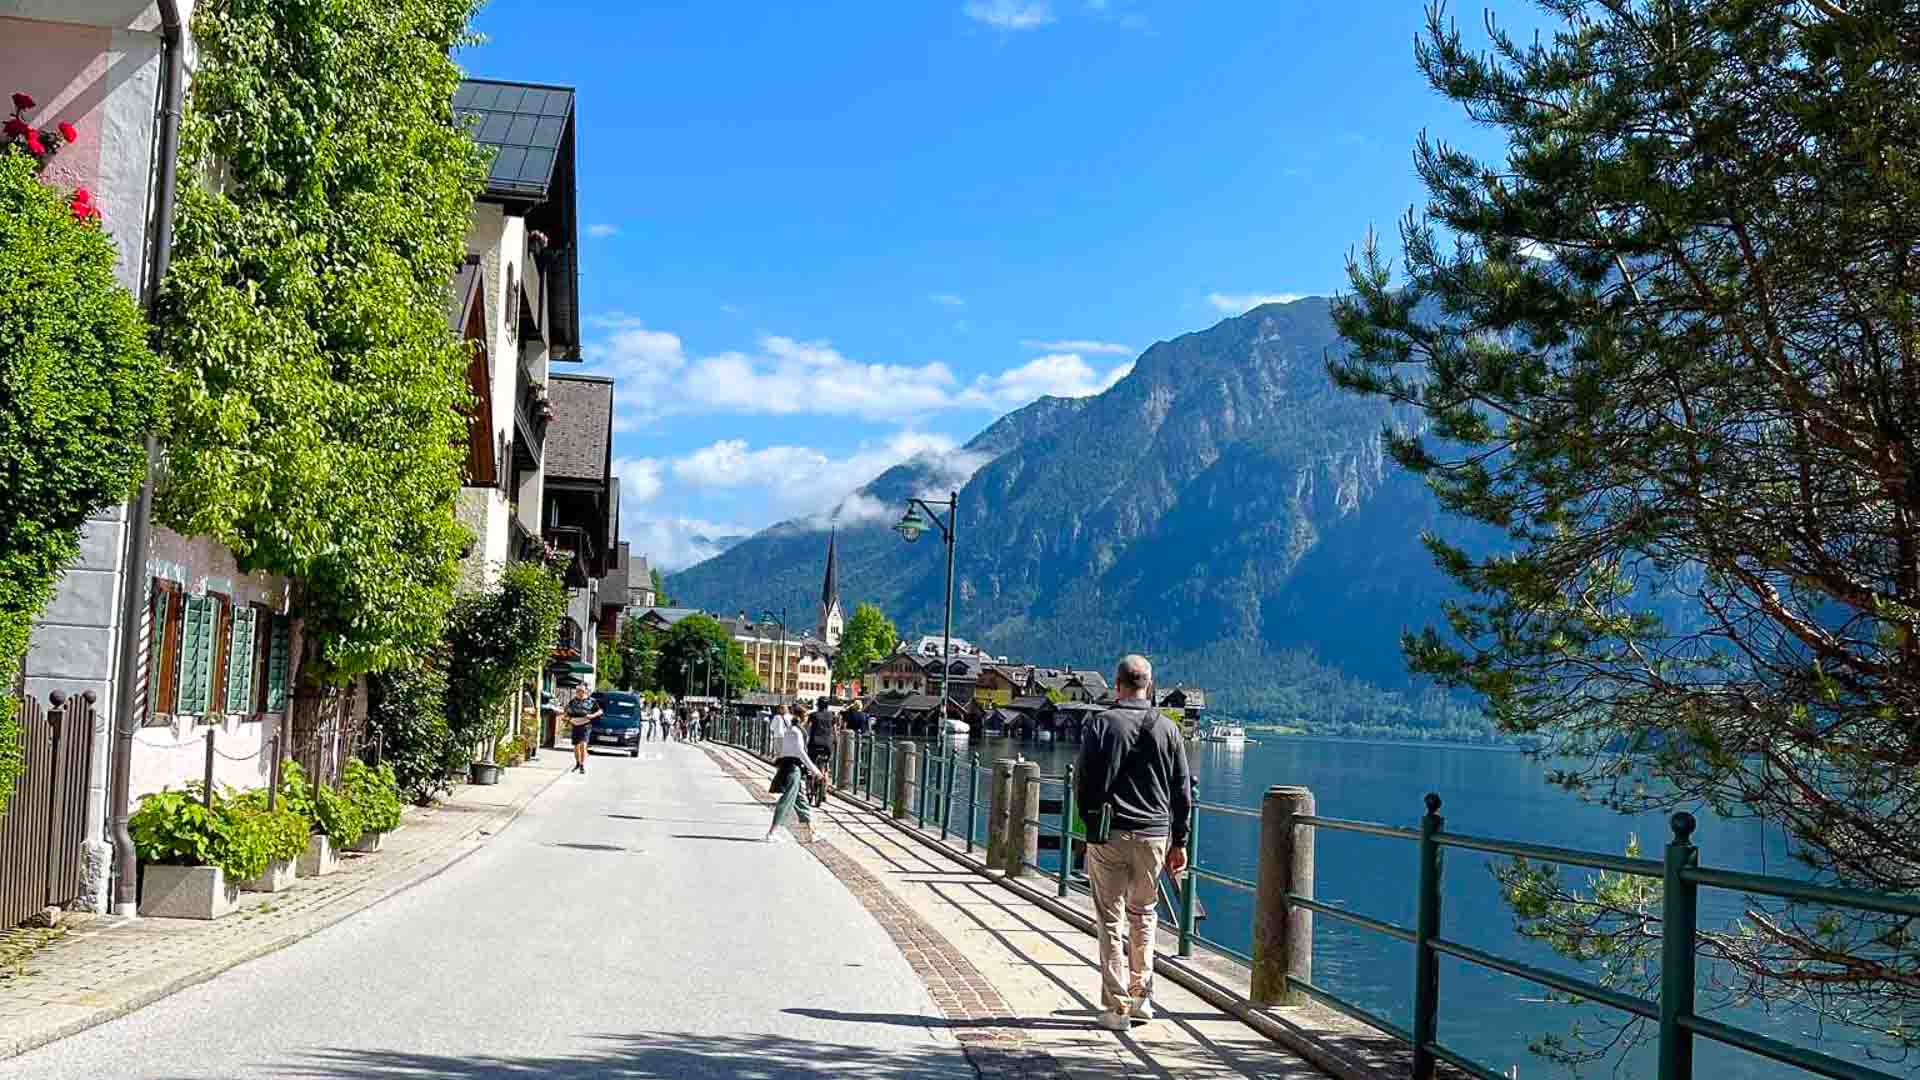 Leaving Hallstatt with lake and road